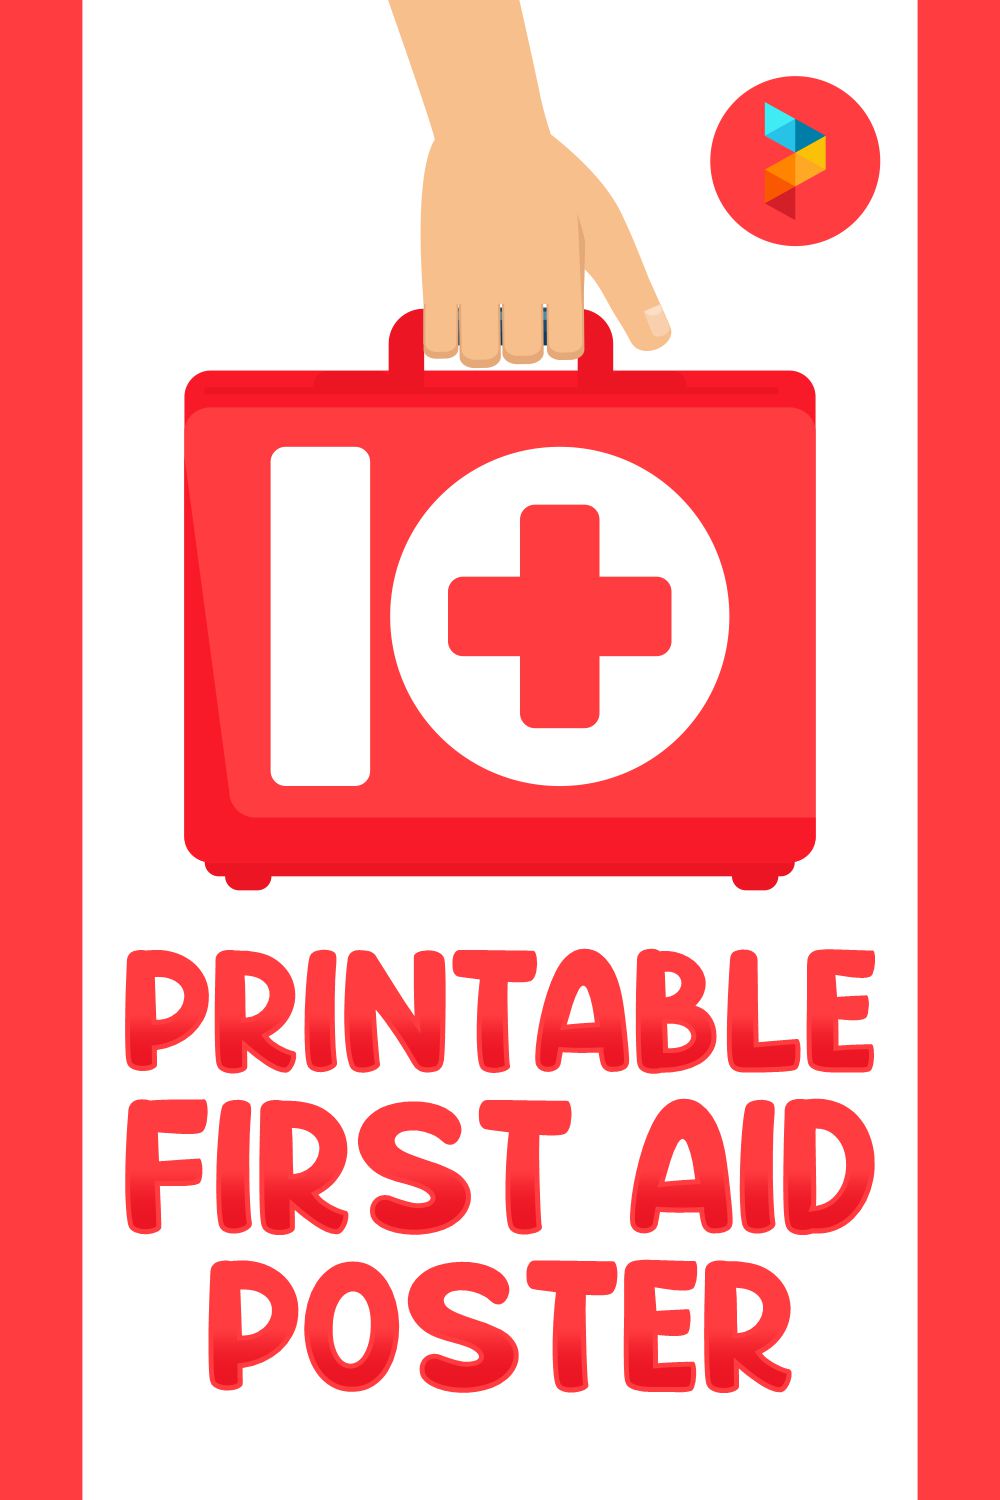 Printable First Aid Poster